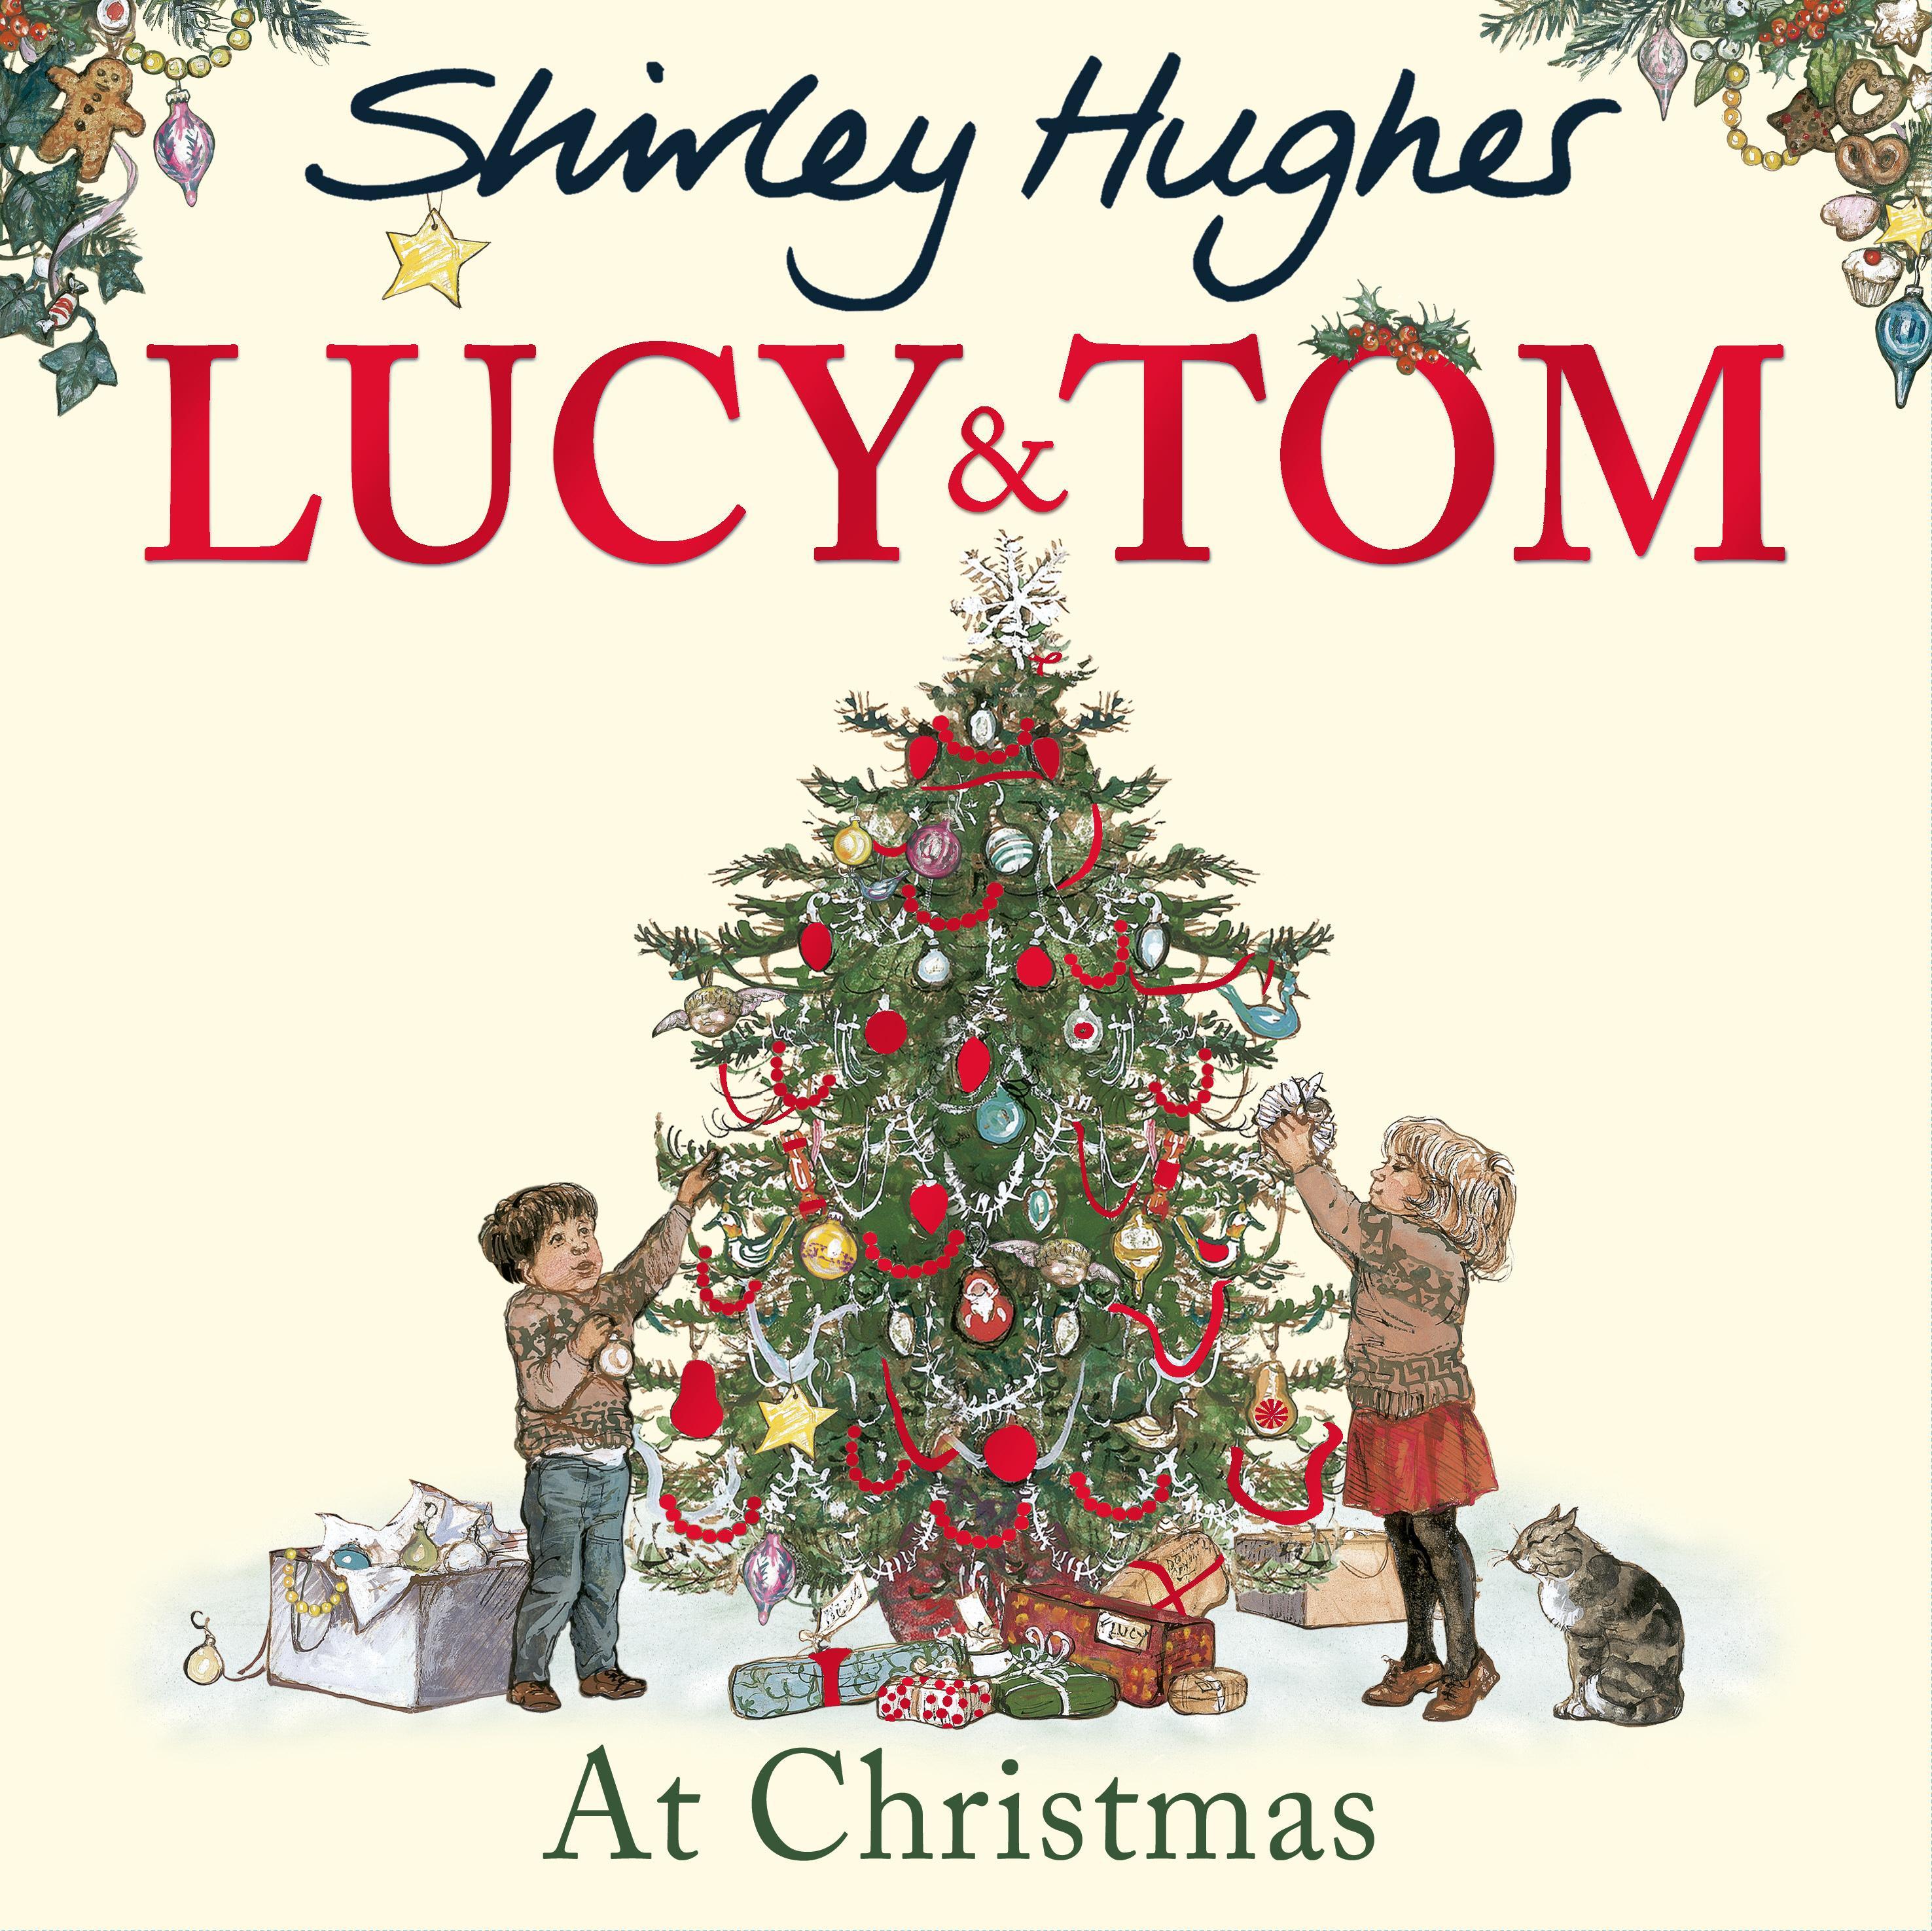 Lucy and Tom at Christmas - Shirley Hughes